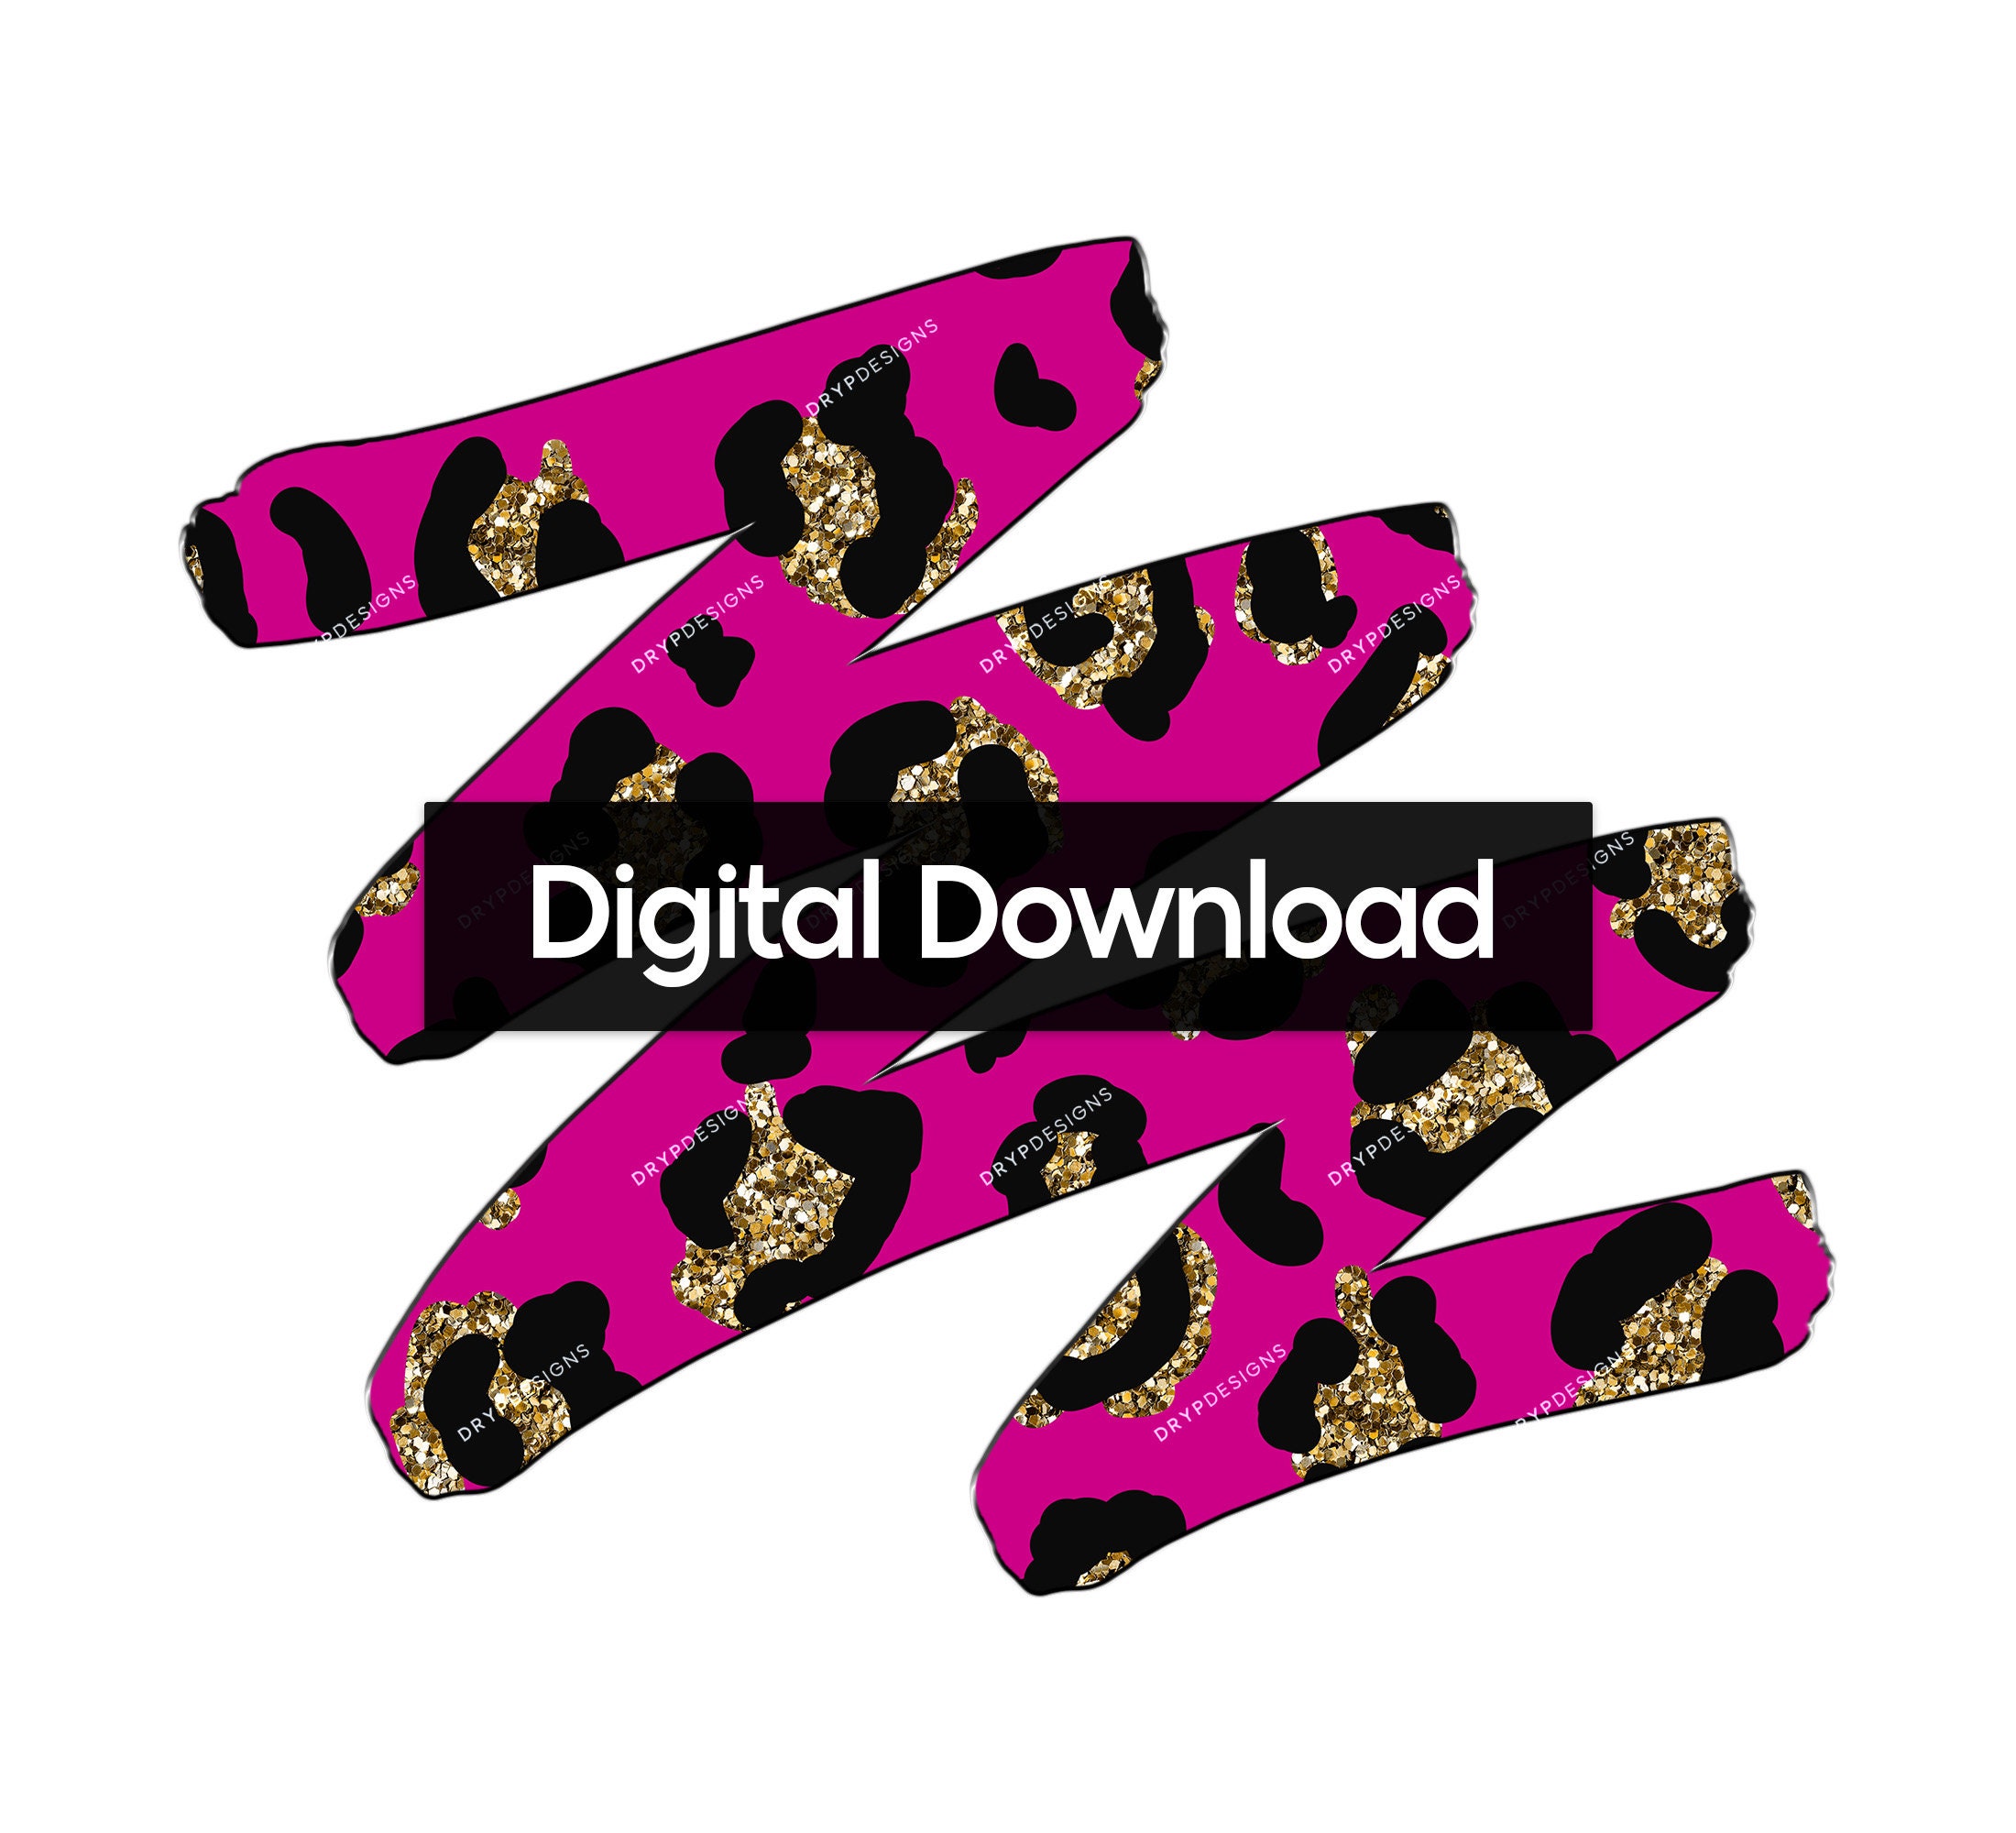 Permanent Preorder - Coords - Animal Prints - Glitter Leopard Pink – Royal  Pixie Custom Fabric